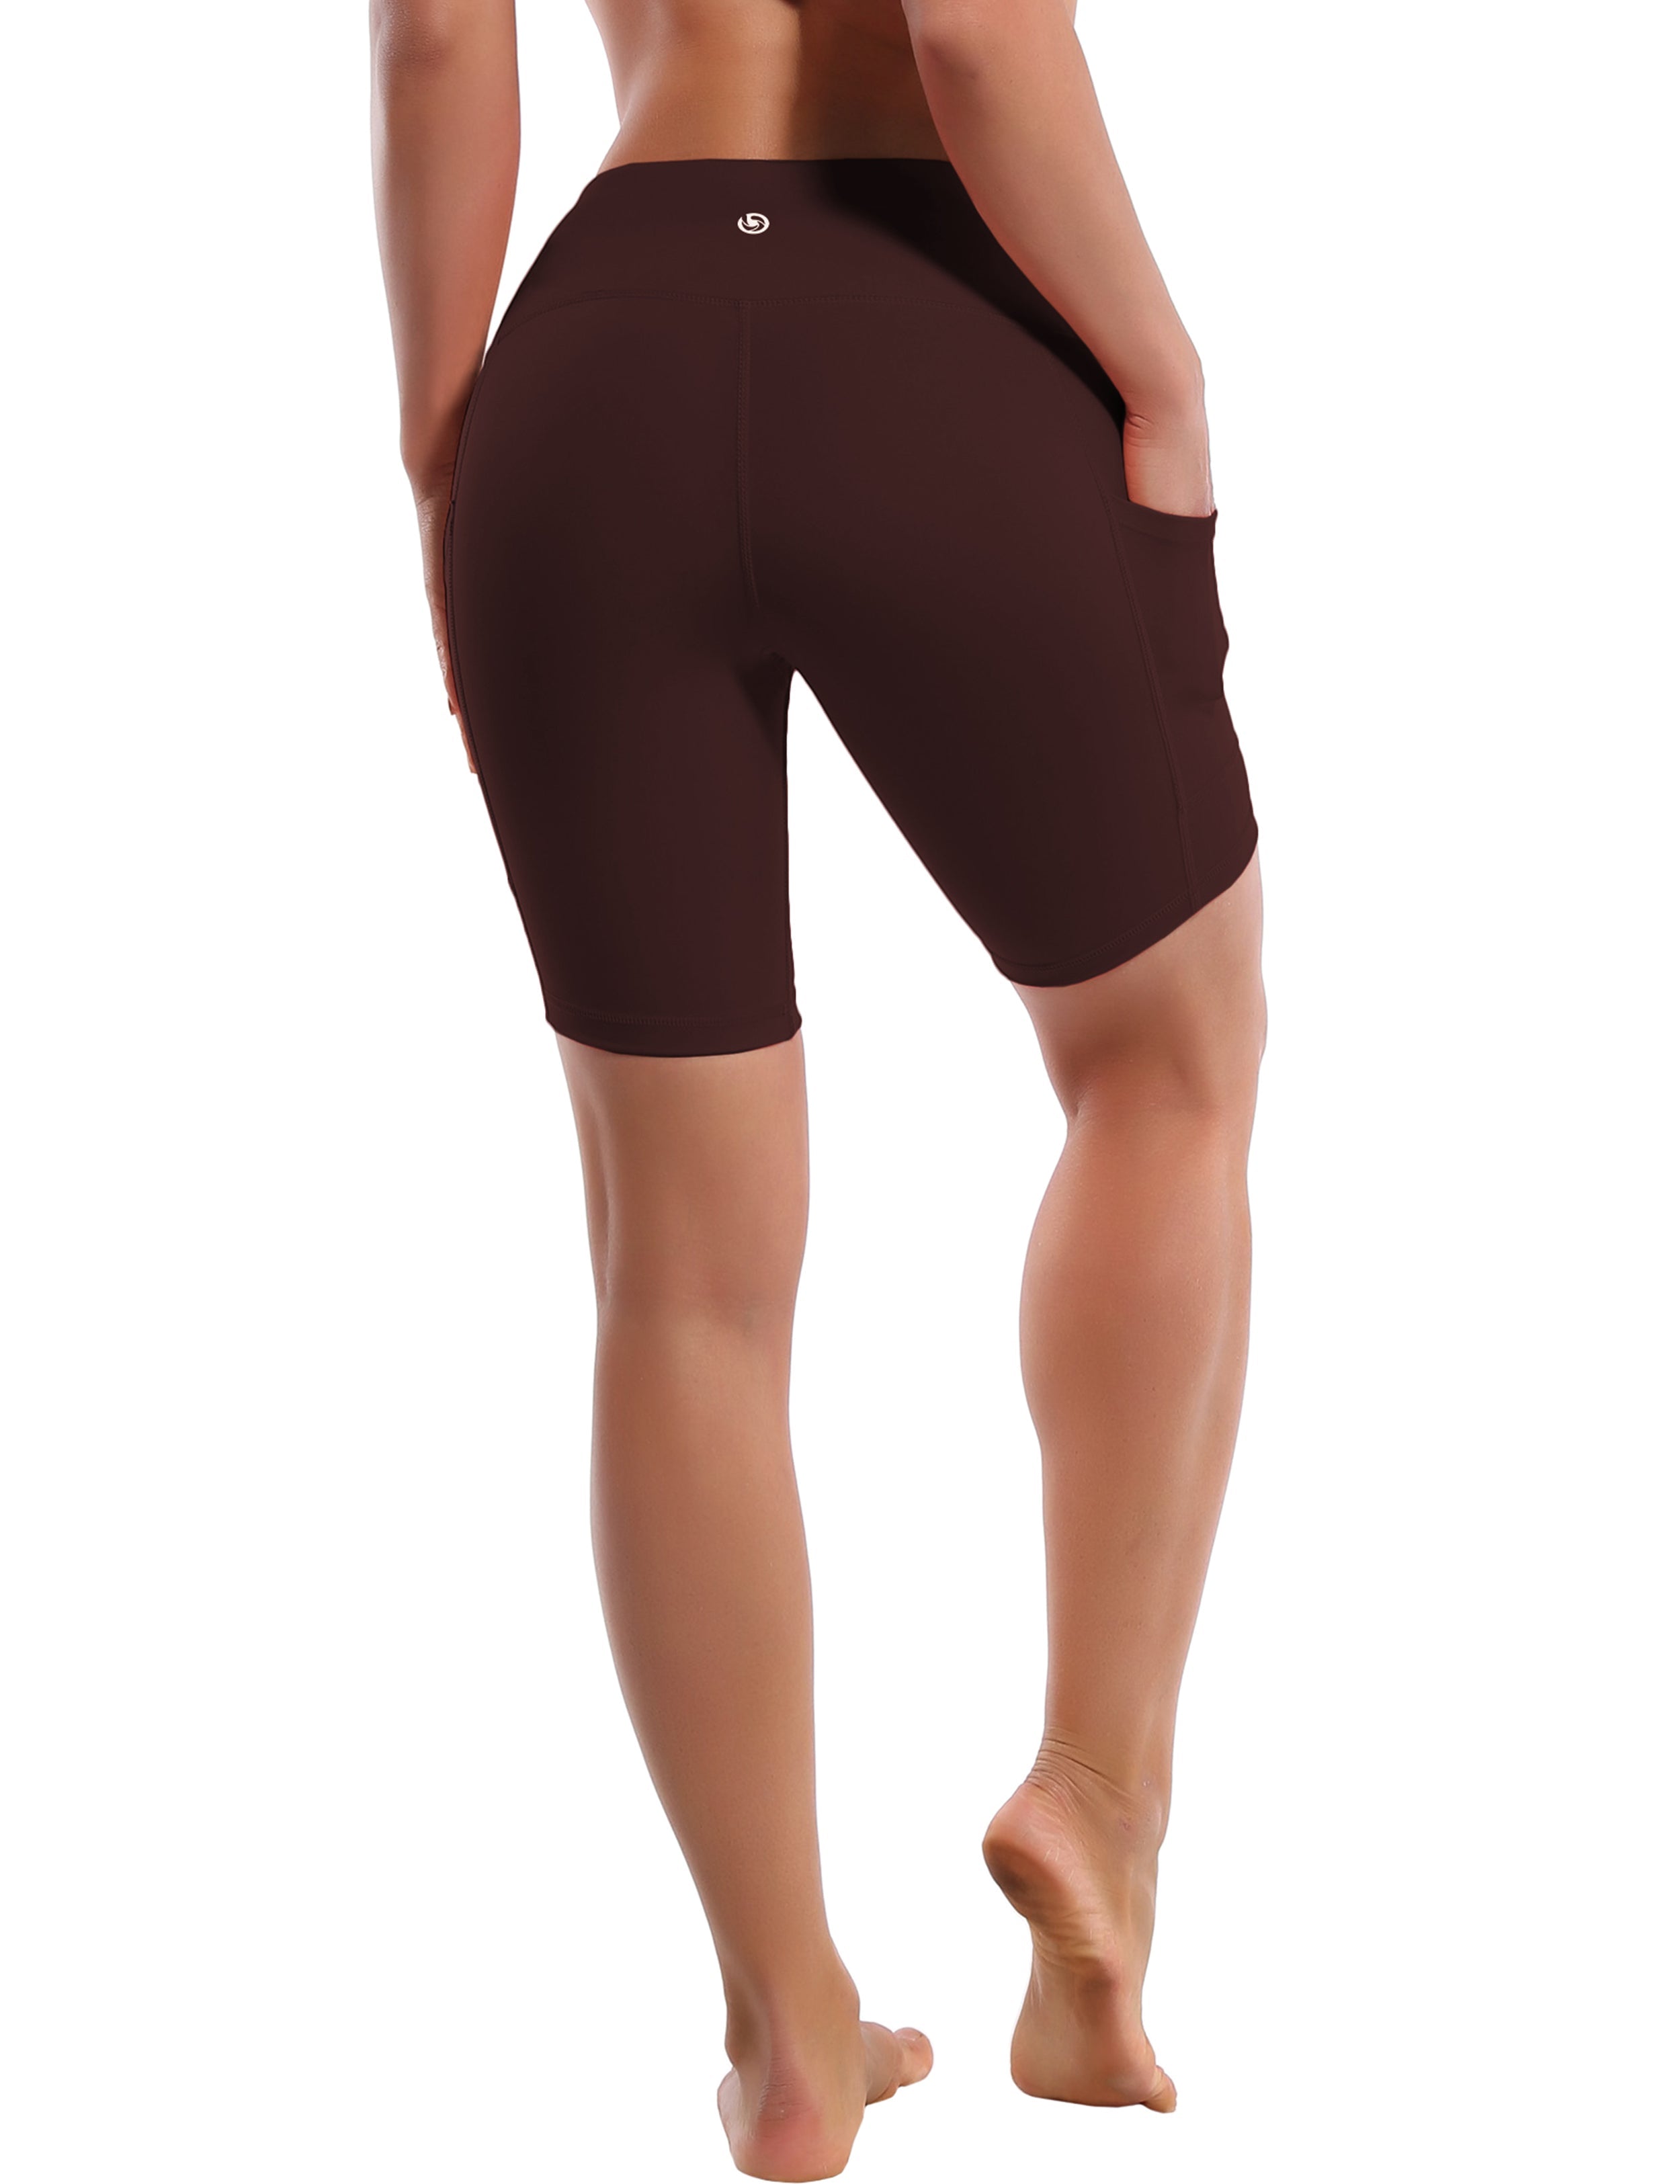 8" Side Pockets Biking Shorts mahoganymaroon Sleek, soft, smooth and totally comfortable: our newest style is here. Softest-ever fabric High elasticity High density 4-way stretch Fabric doesn't attract lint easily No see-through Moisture-wicking Machine wash 75% Nylon, 25% Spandex